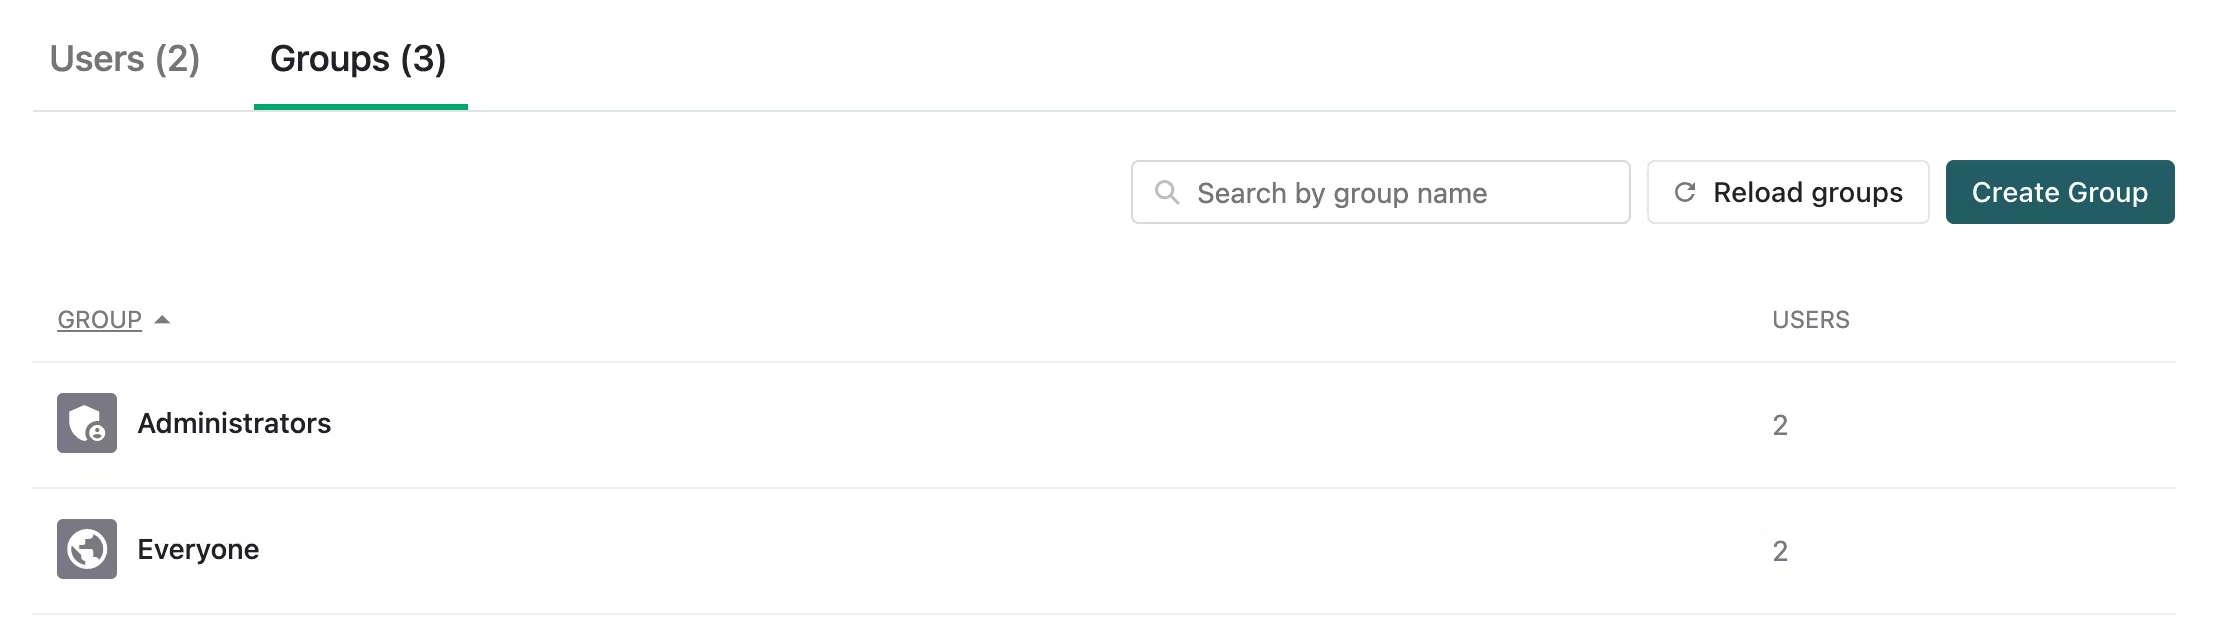 Image of the Administrator Group in the Groups list.